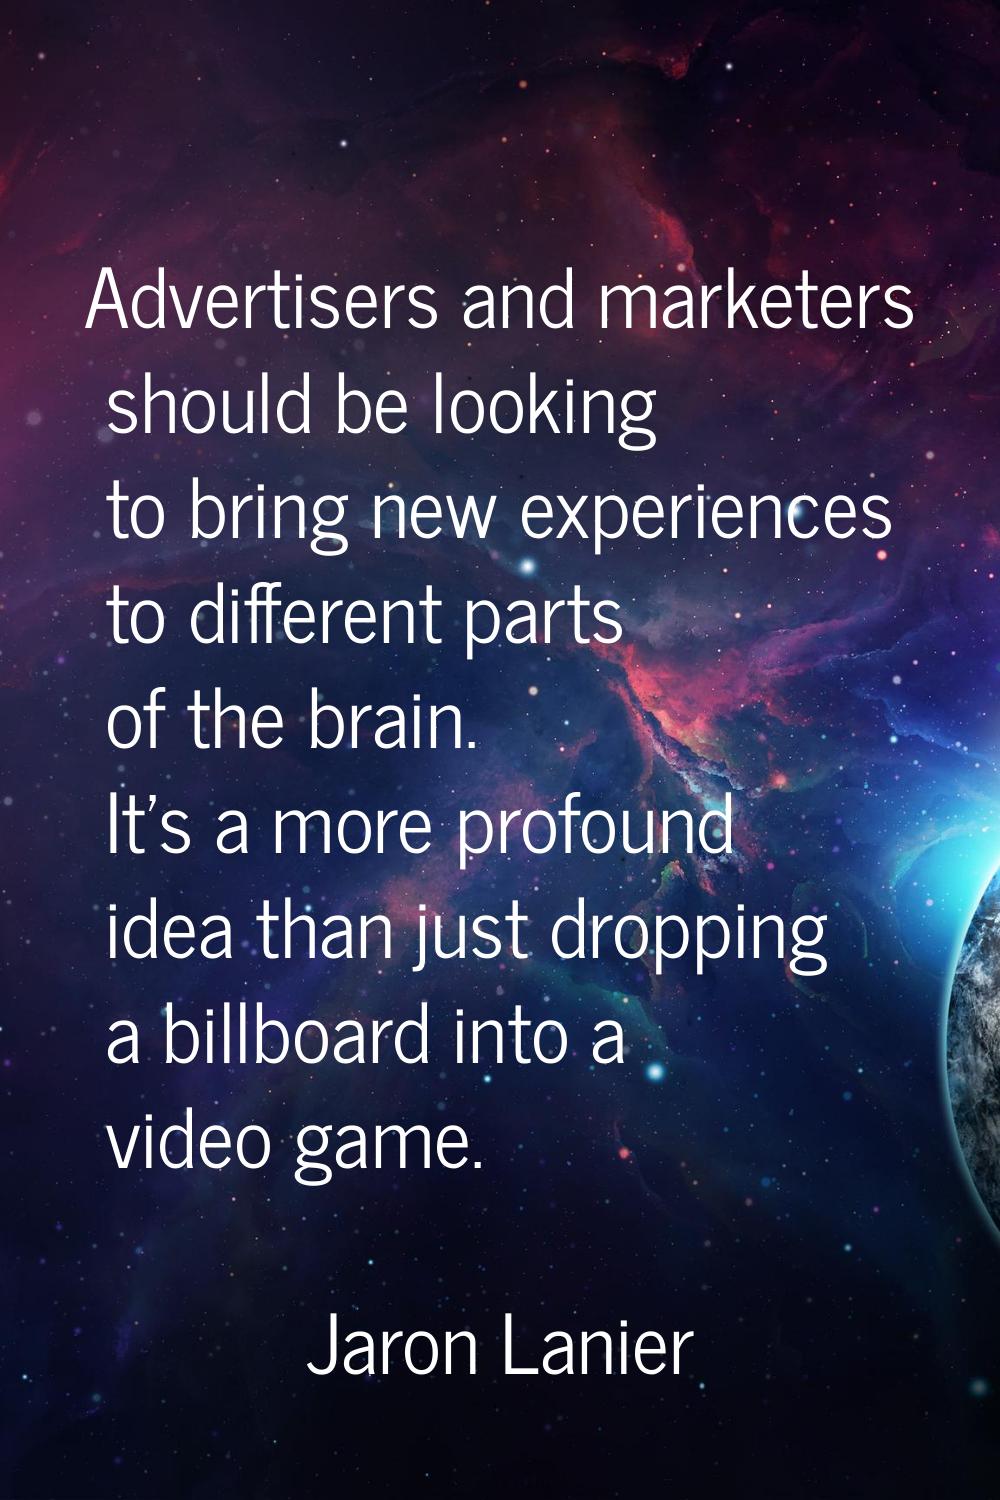 Advertisers and marketers should be looking to bring new experiences to different parts of the brai